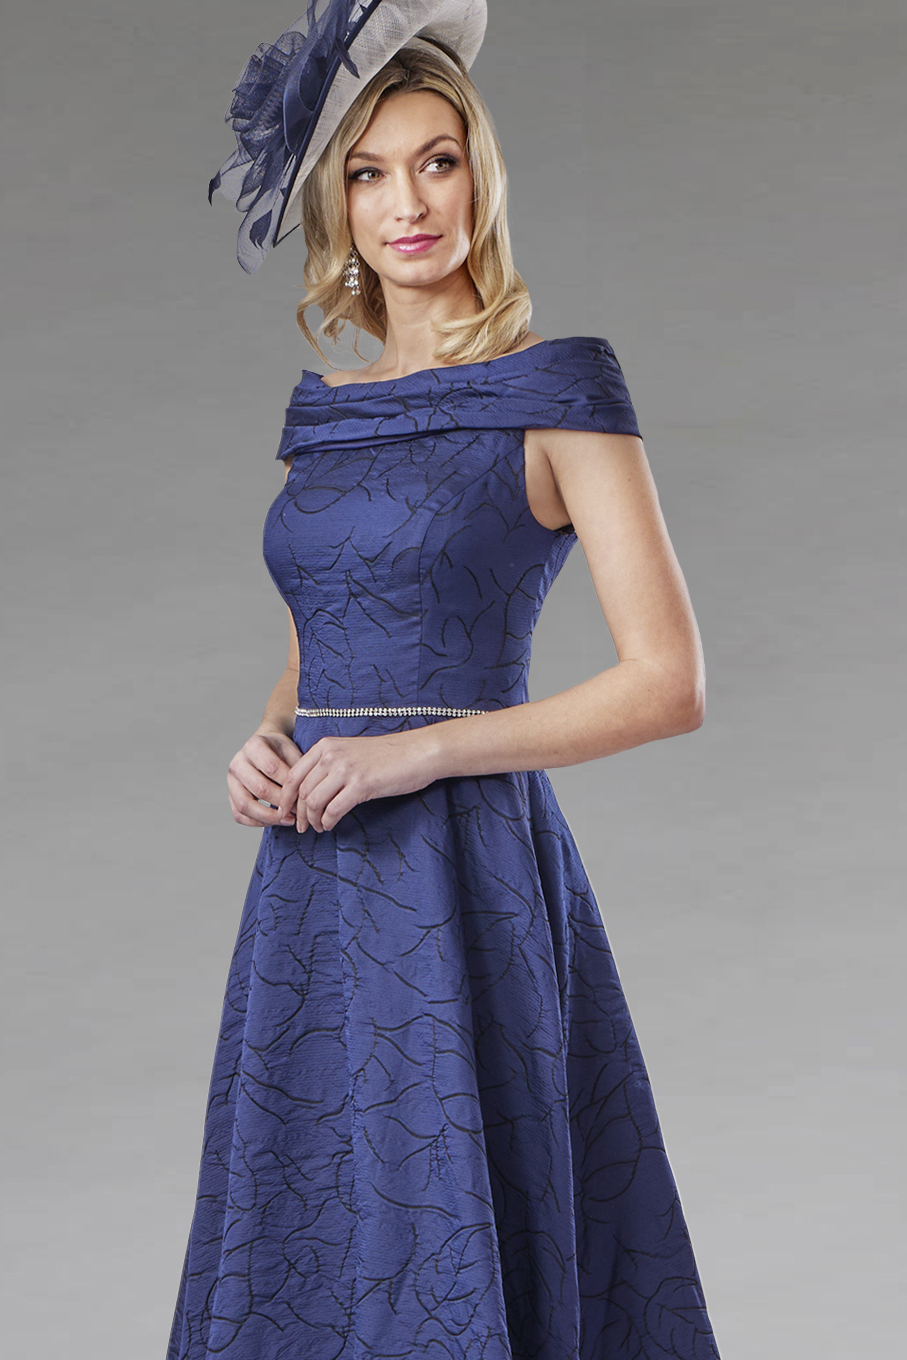 Dipped Hem Dress With Diamante Trim. VO8127 size 14 - Catherines of Partick